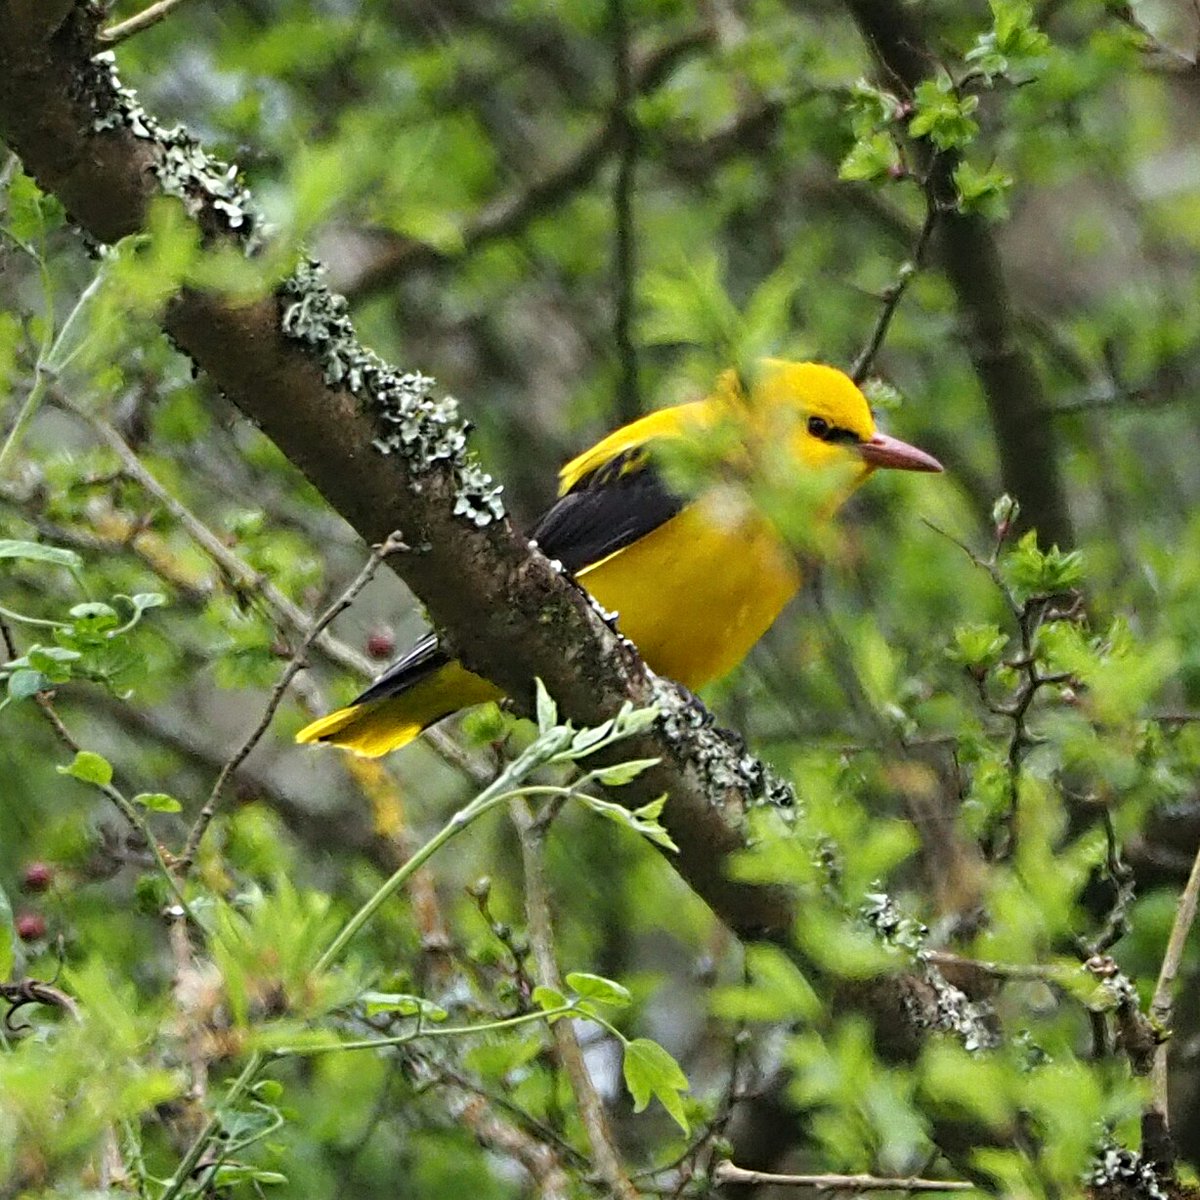 Absolutely thrilled to see 2 Golden Orioles together at Cwm Ivy woods today Welsh tic for me